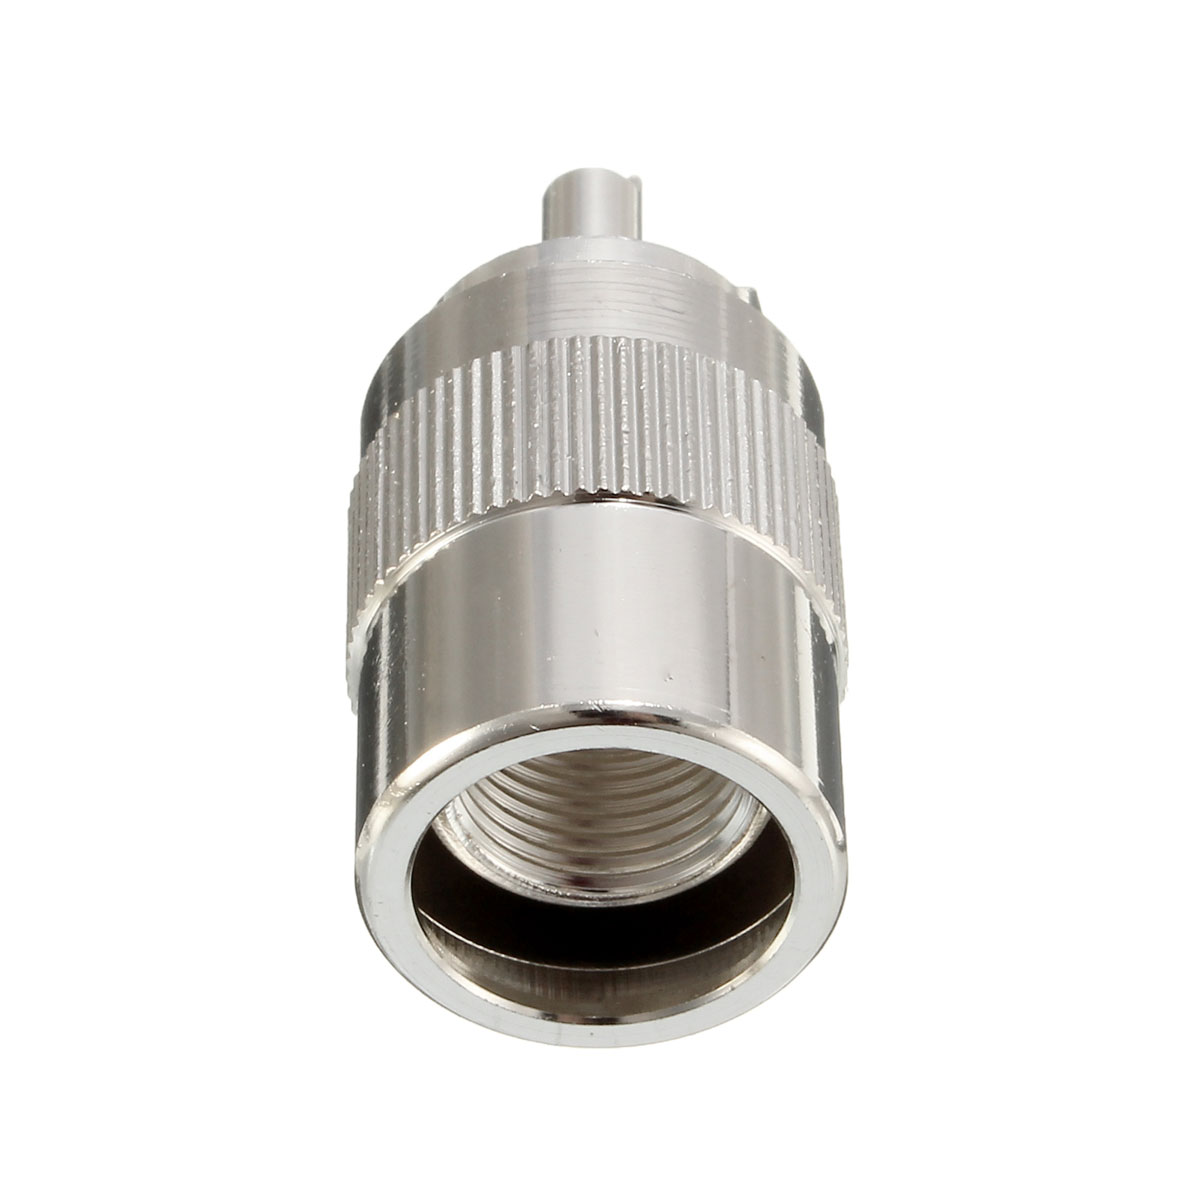 UHF-PL259-Male-Connector-Plug-Solder-RG8-RG213-LMR400-7D-FB-Cable-Replacement-Accessories-1240065